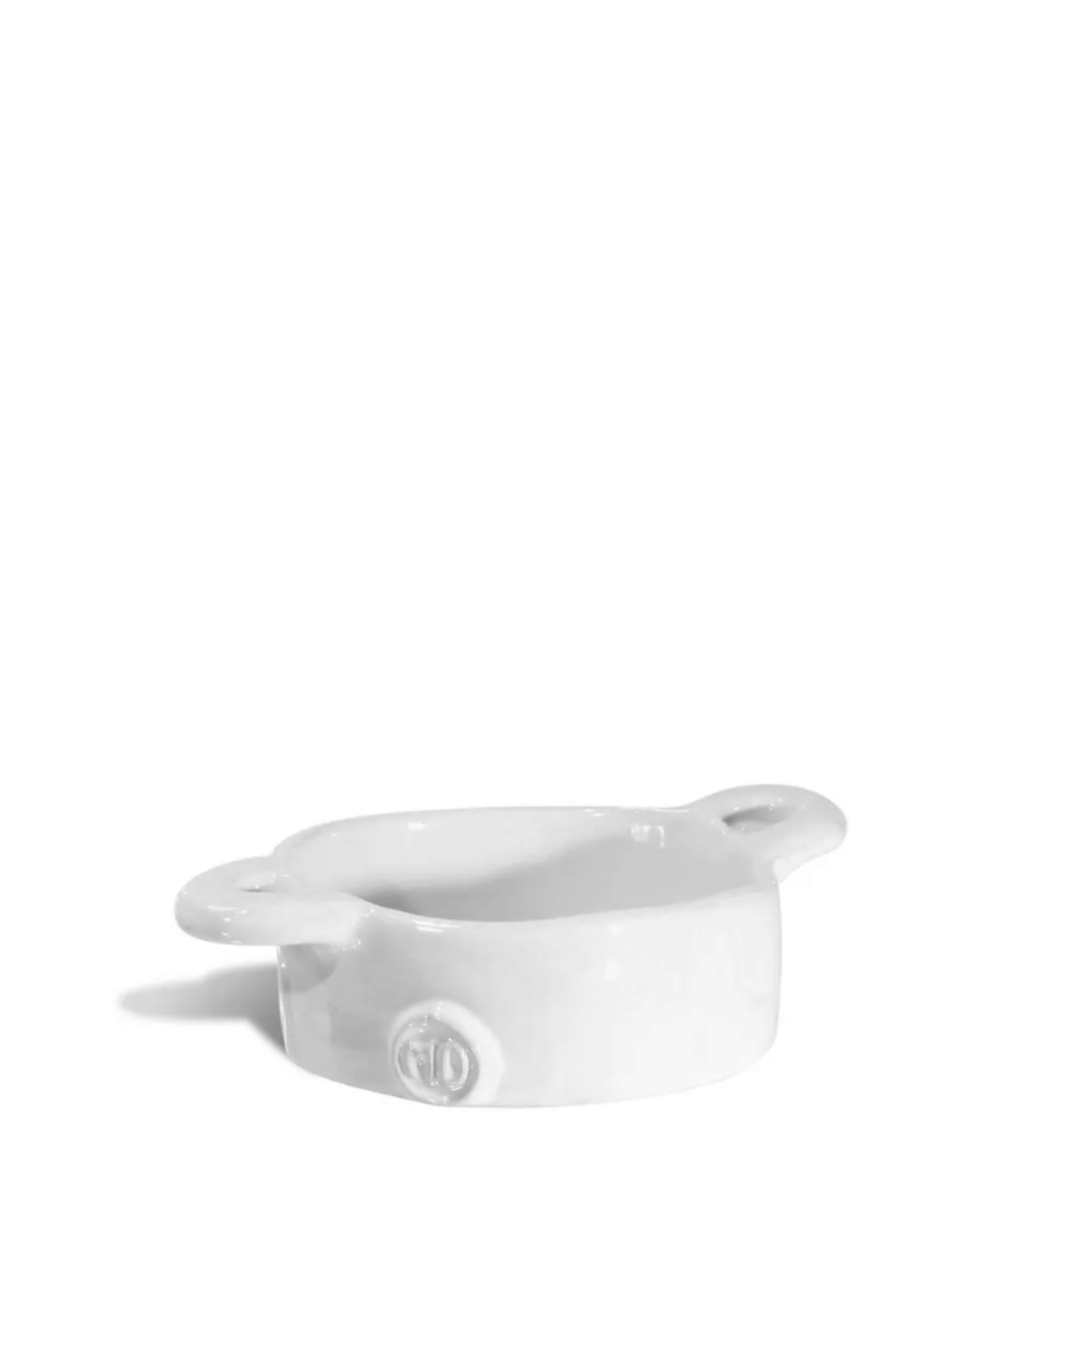 White ceramic ramekin with handles, displayed on a plain background in a Scottsdale Arizona bungalow. (Bowl No. 5 by Montes Doggett)